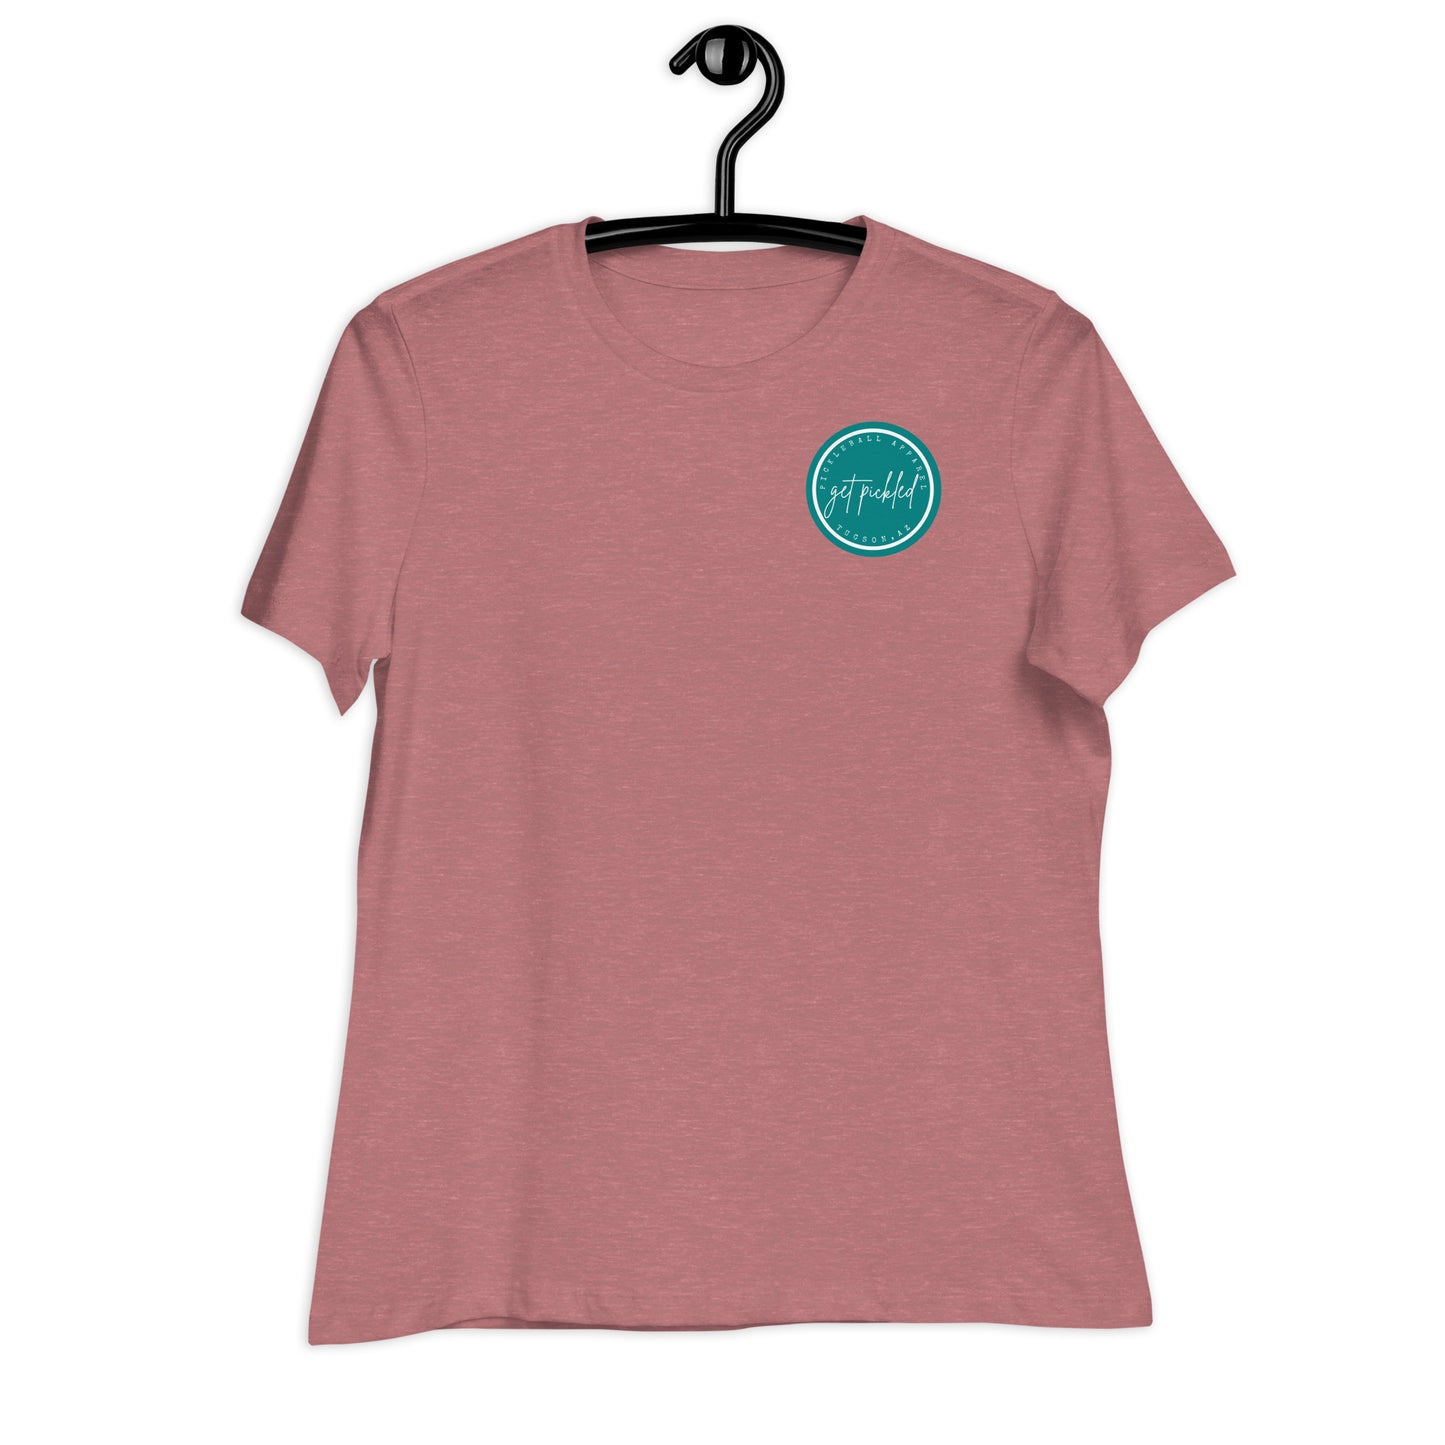 Sorry, Not Sorry. Women's Relaxed T-Shirt